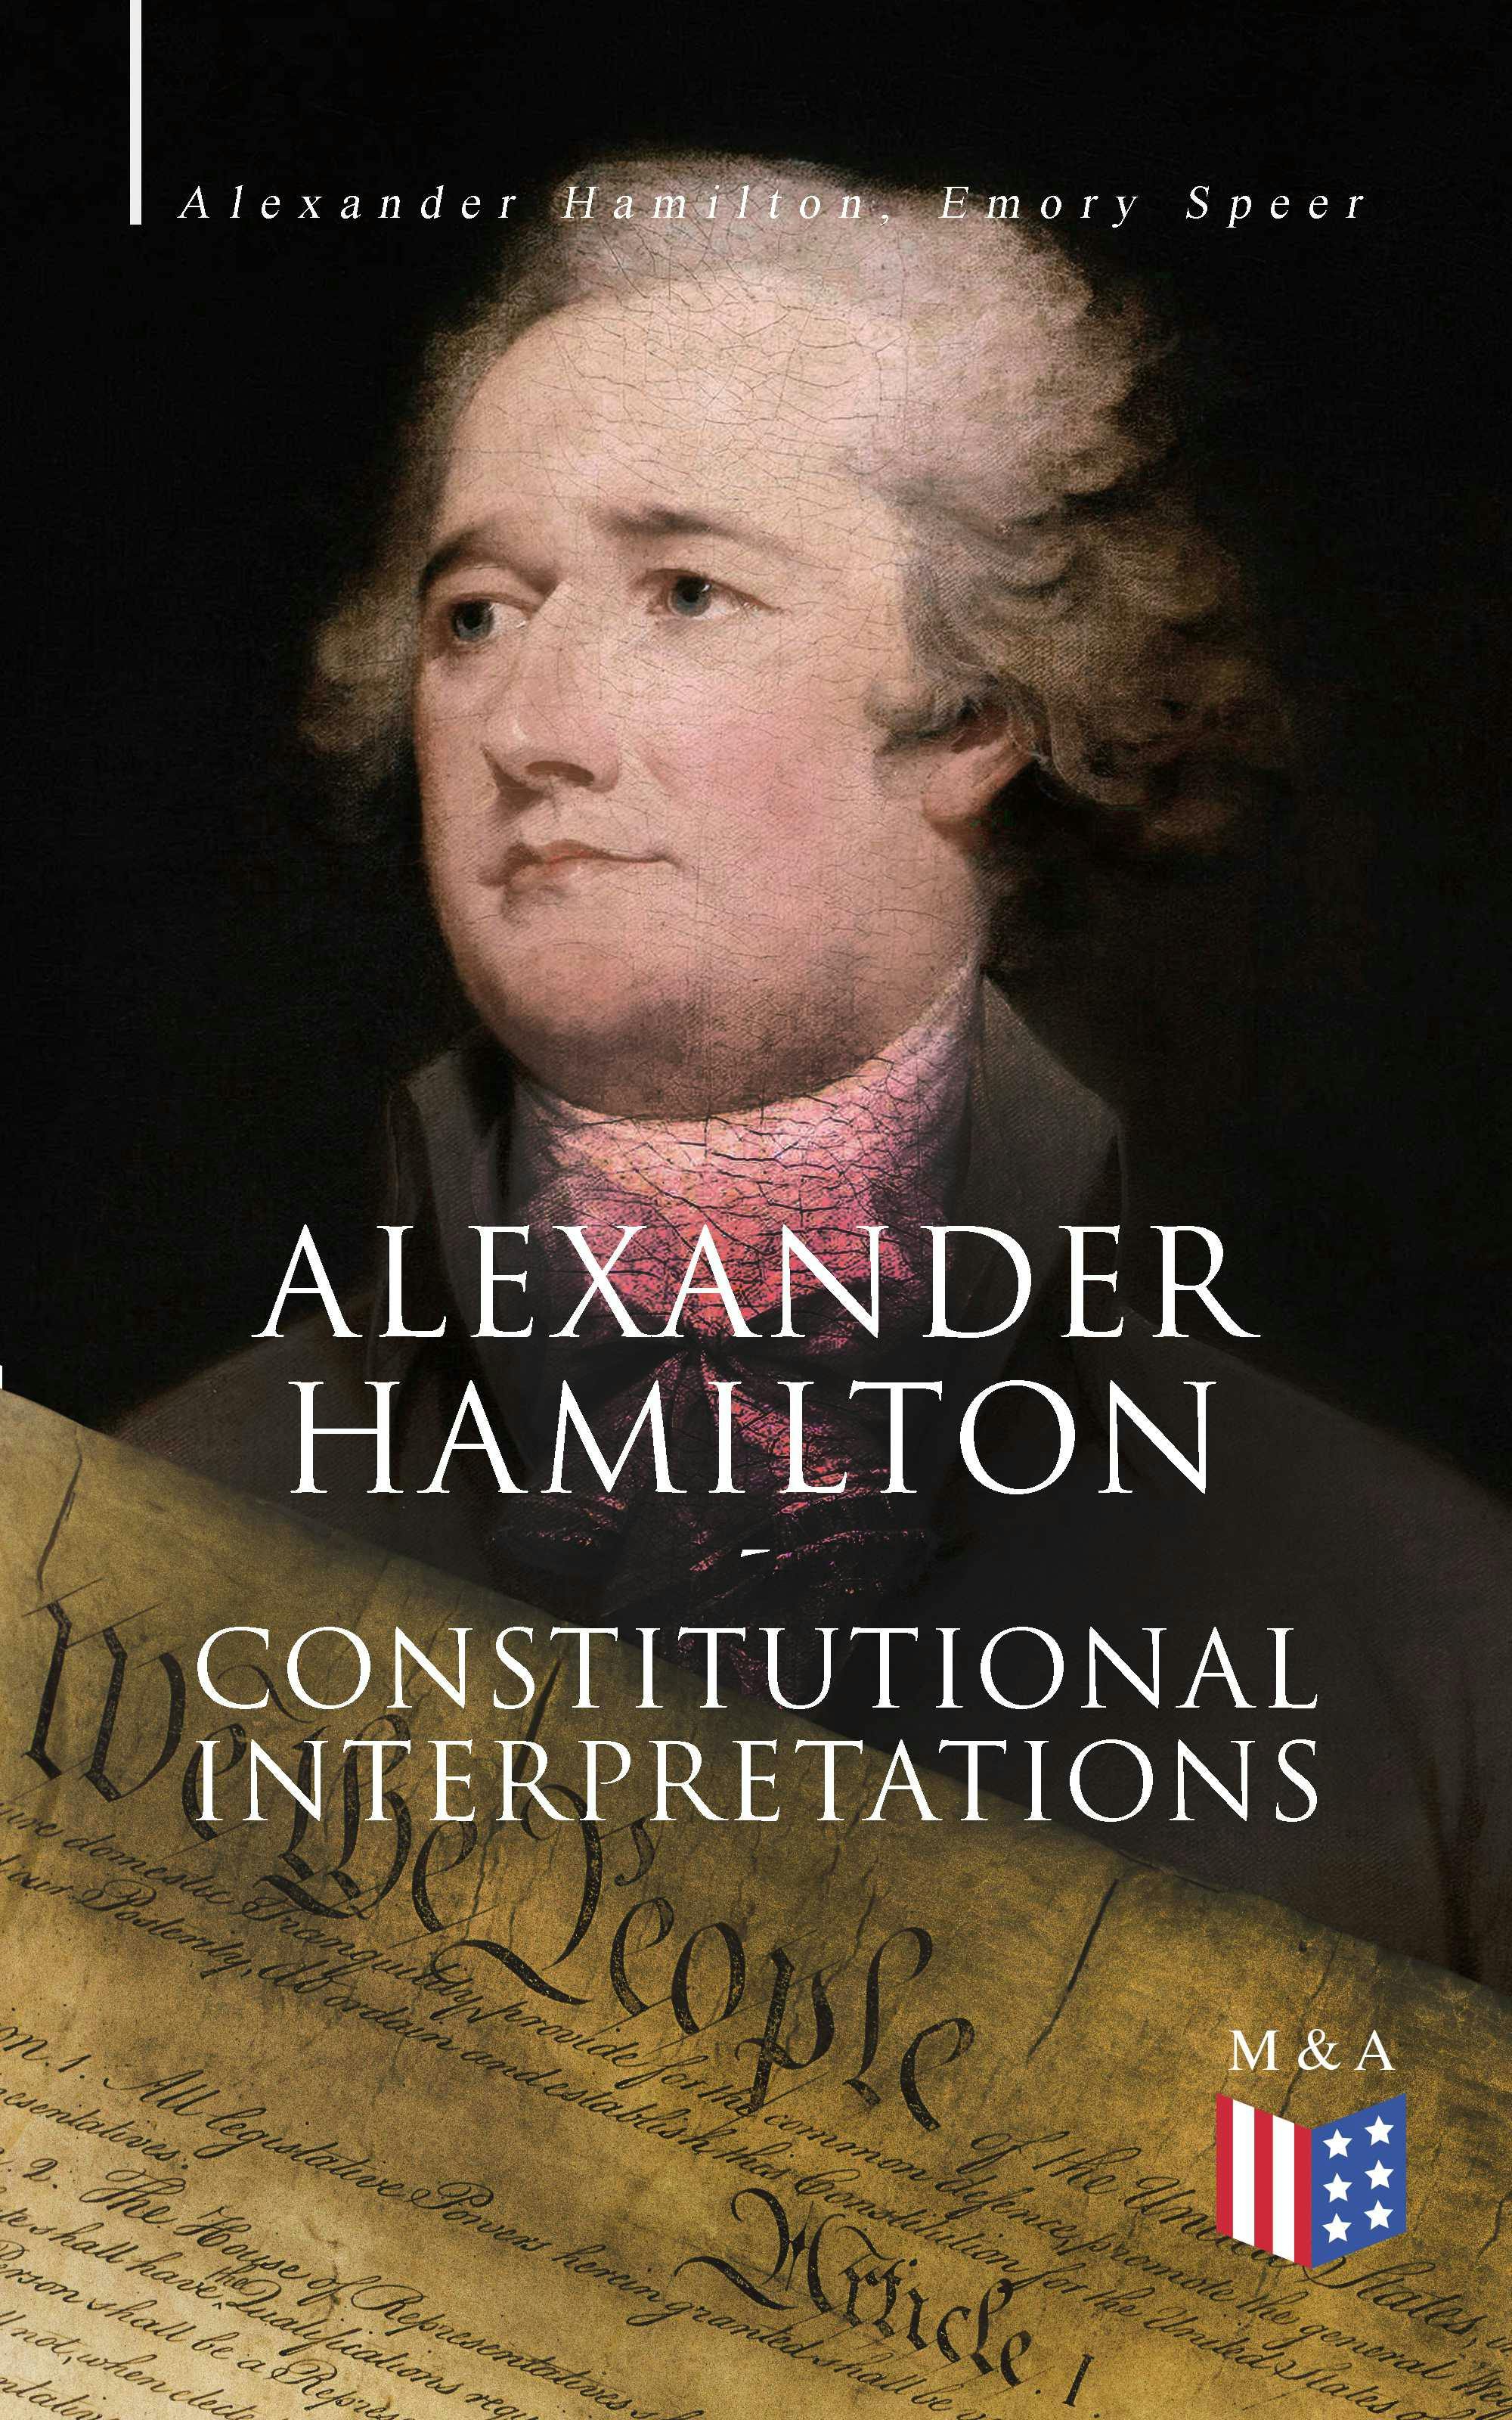 Alexander Hamilton: Constitutional Interpretations: Works & Speeches in Favor of the American Constitution Including The Federalist Papers and The Continentalist - Alexander Hamilton, Emory Speer